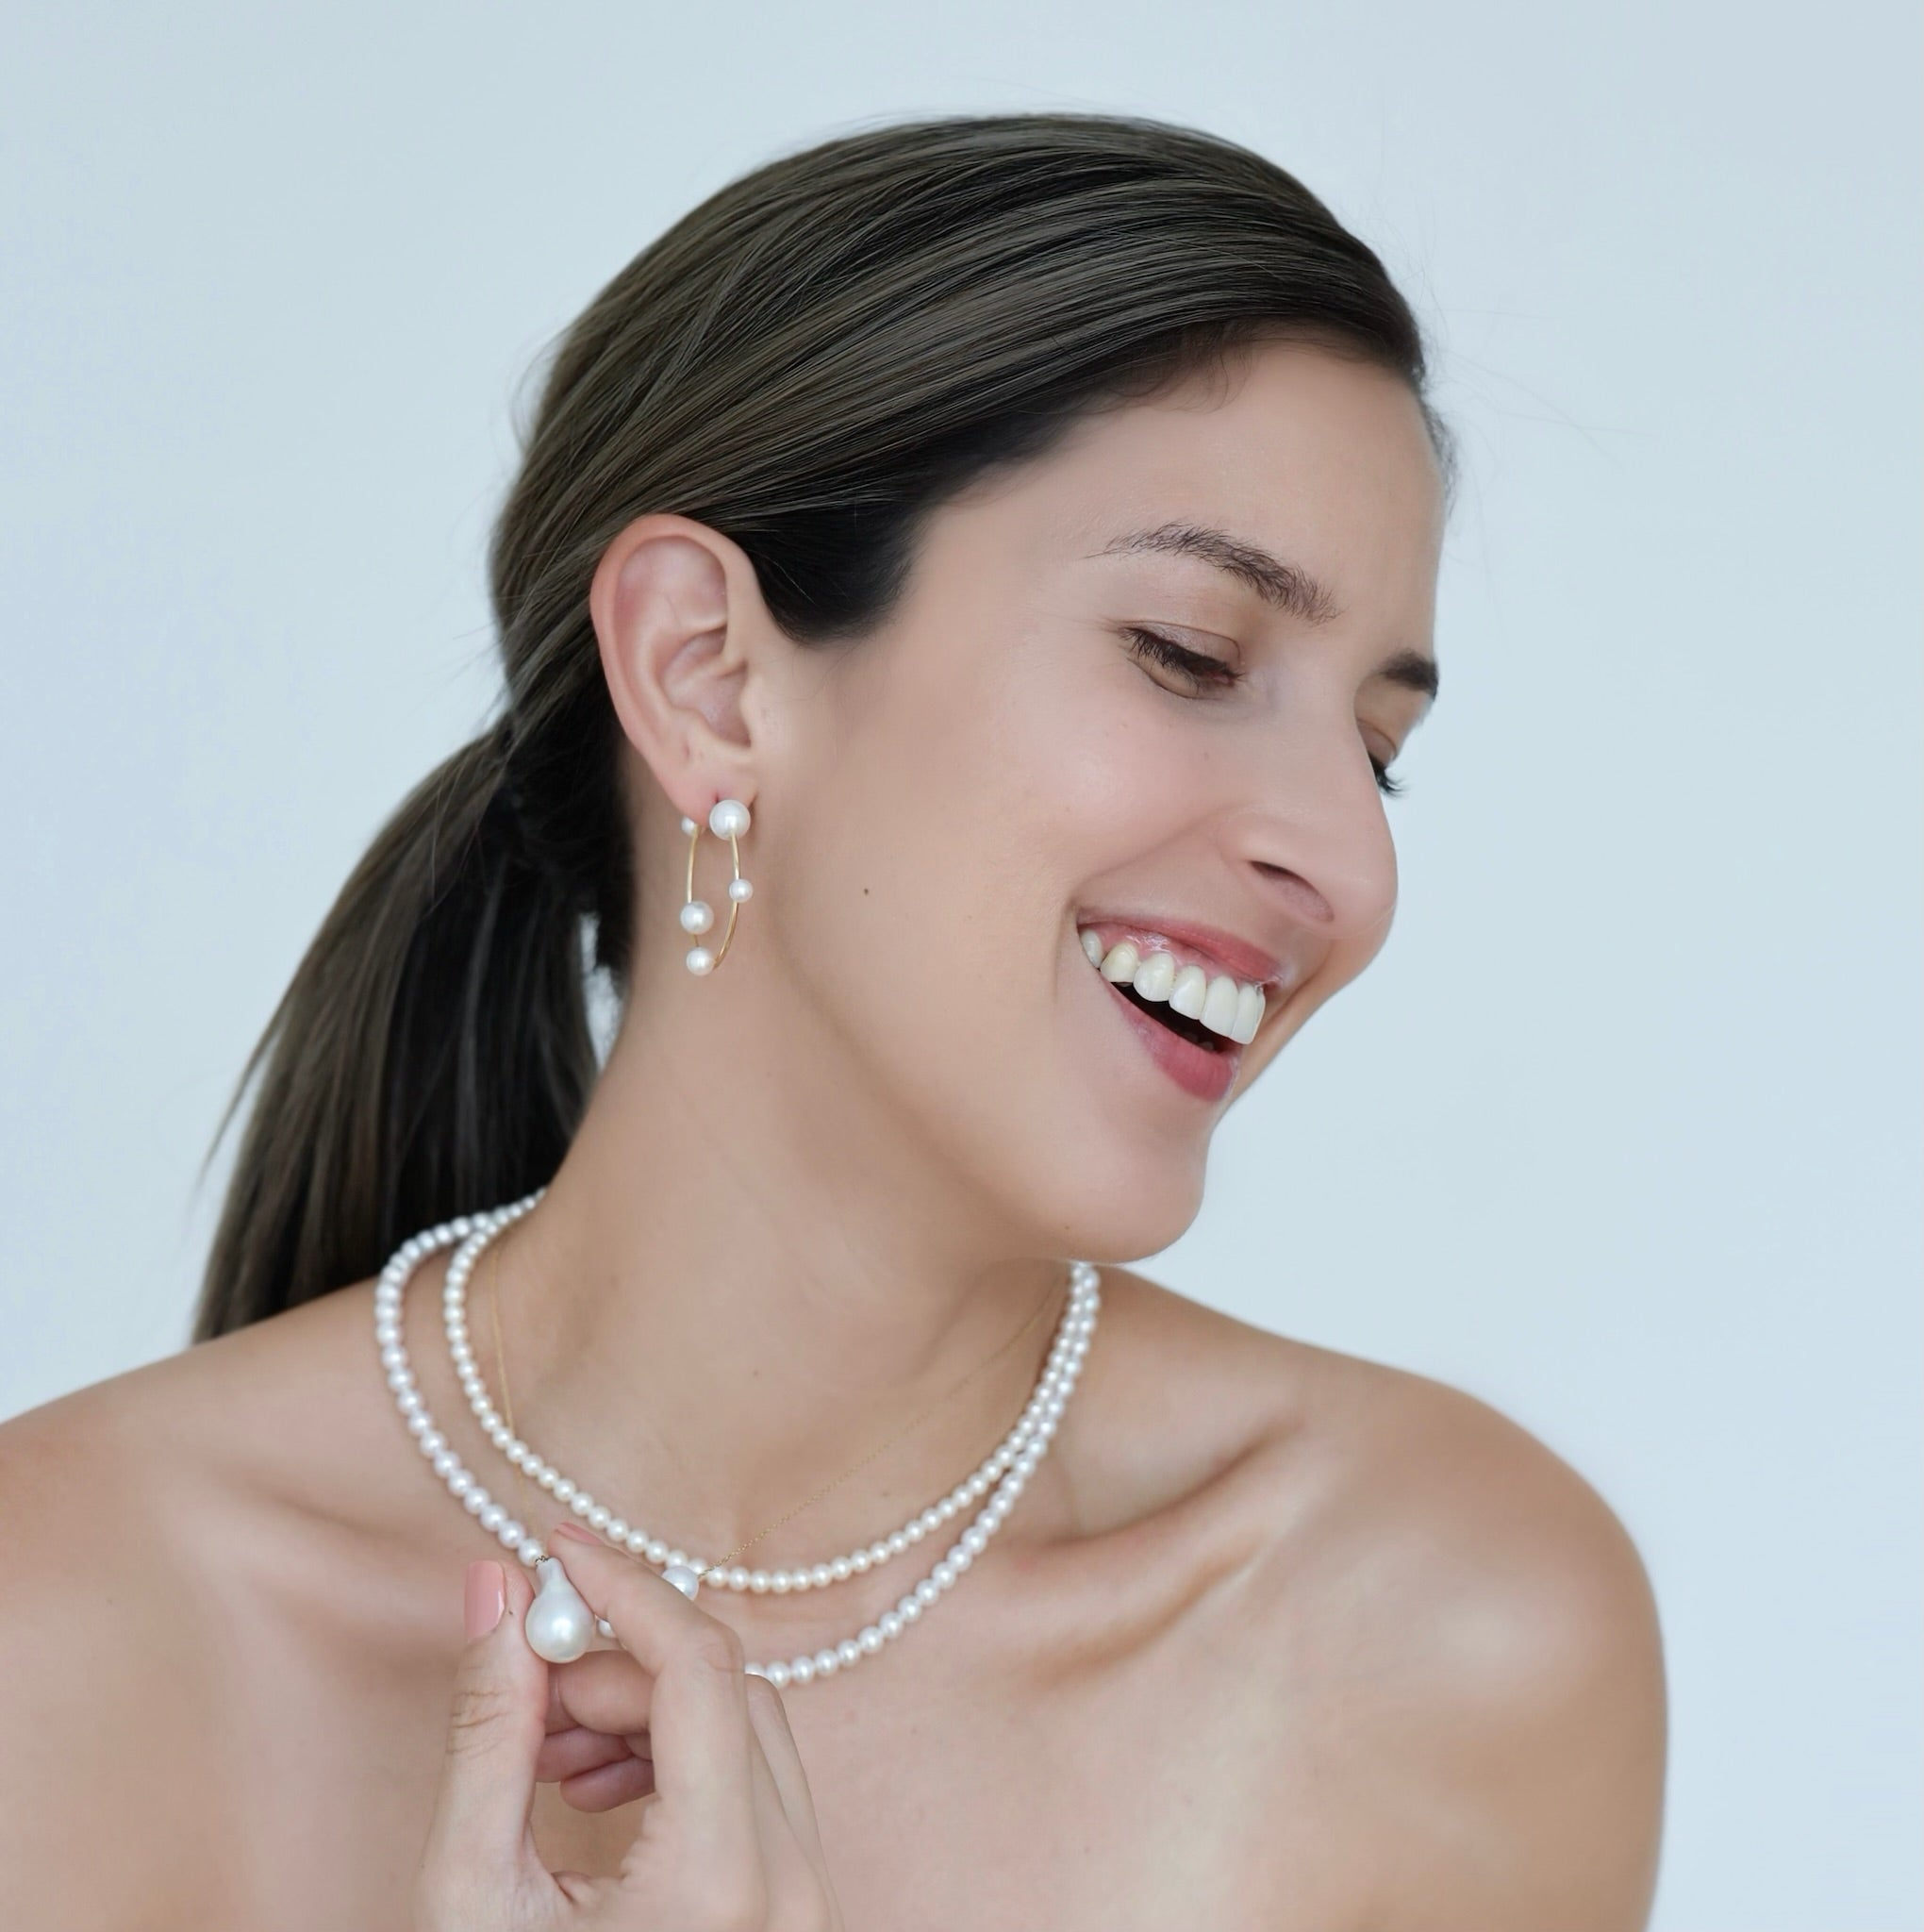 Woman wearing Akoya Hoop Earrings on ear paired with Akoya Baby Pearl Classic Necklace with a Baroque Pearl Charm hooked onto the necklace